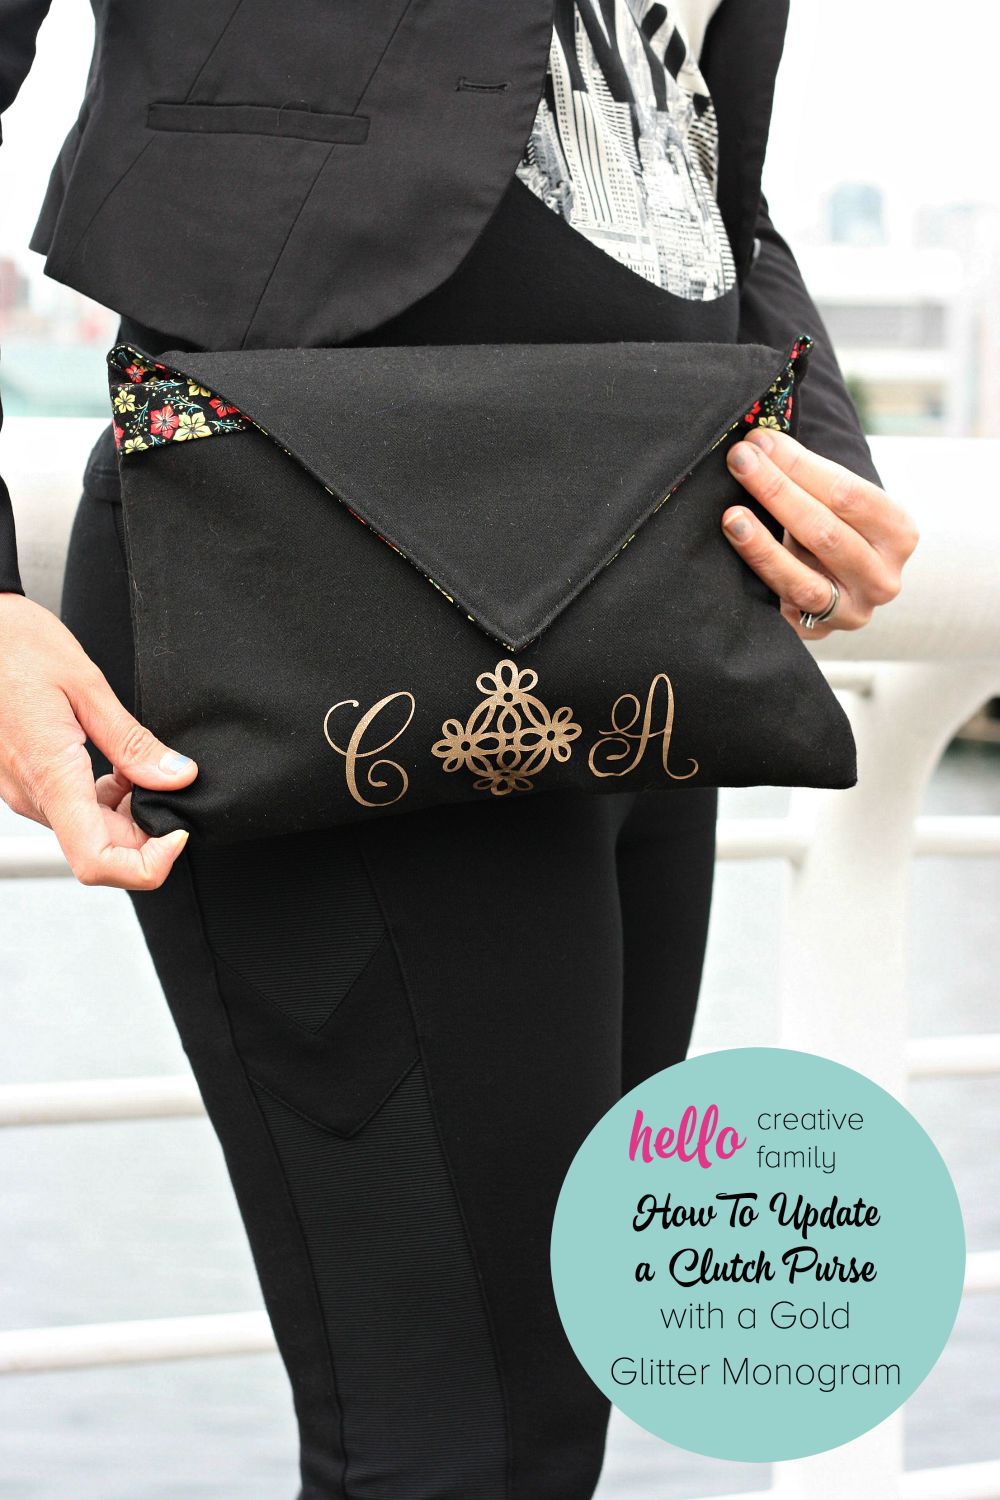 In celebration of the release of Cricut's Gold Edition, Hello Creative Family shares how to update a clutch purse with a gold glitter monogram 2